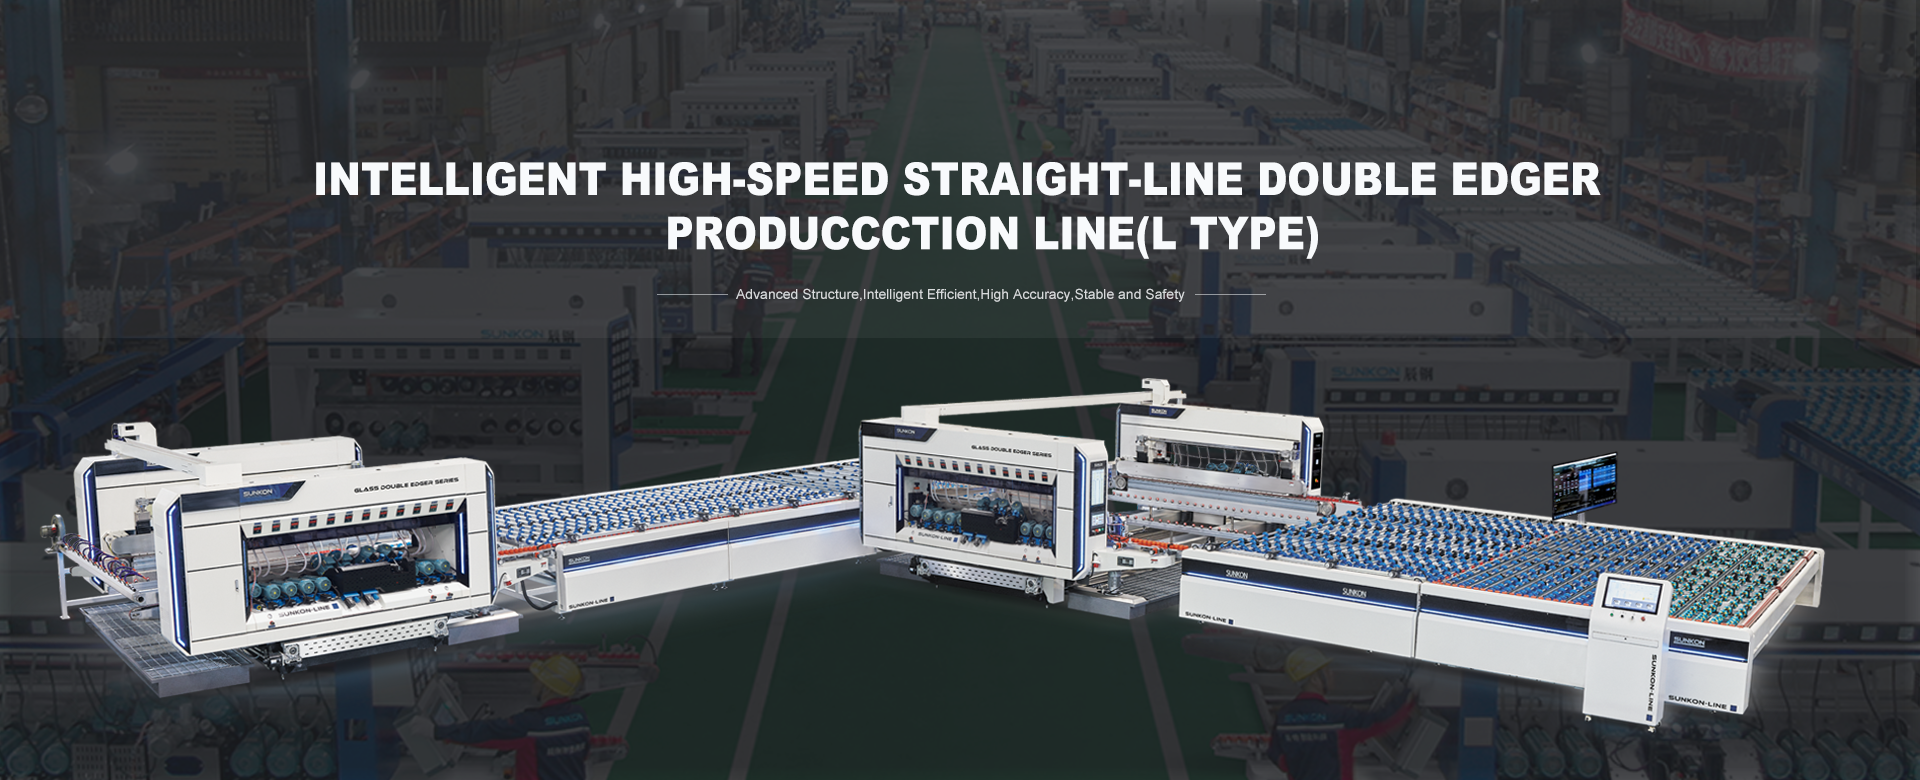 Intelligent High-Speed Straight-Line Double Edger Production Line(L Type)